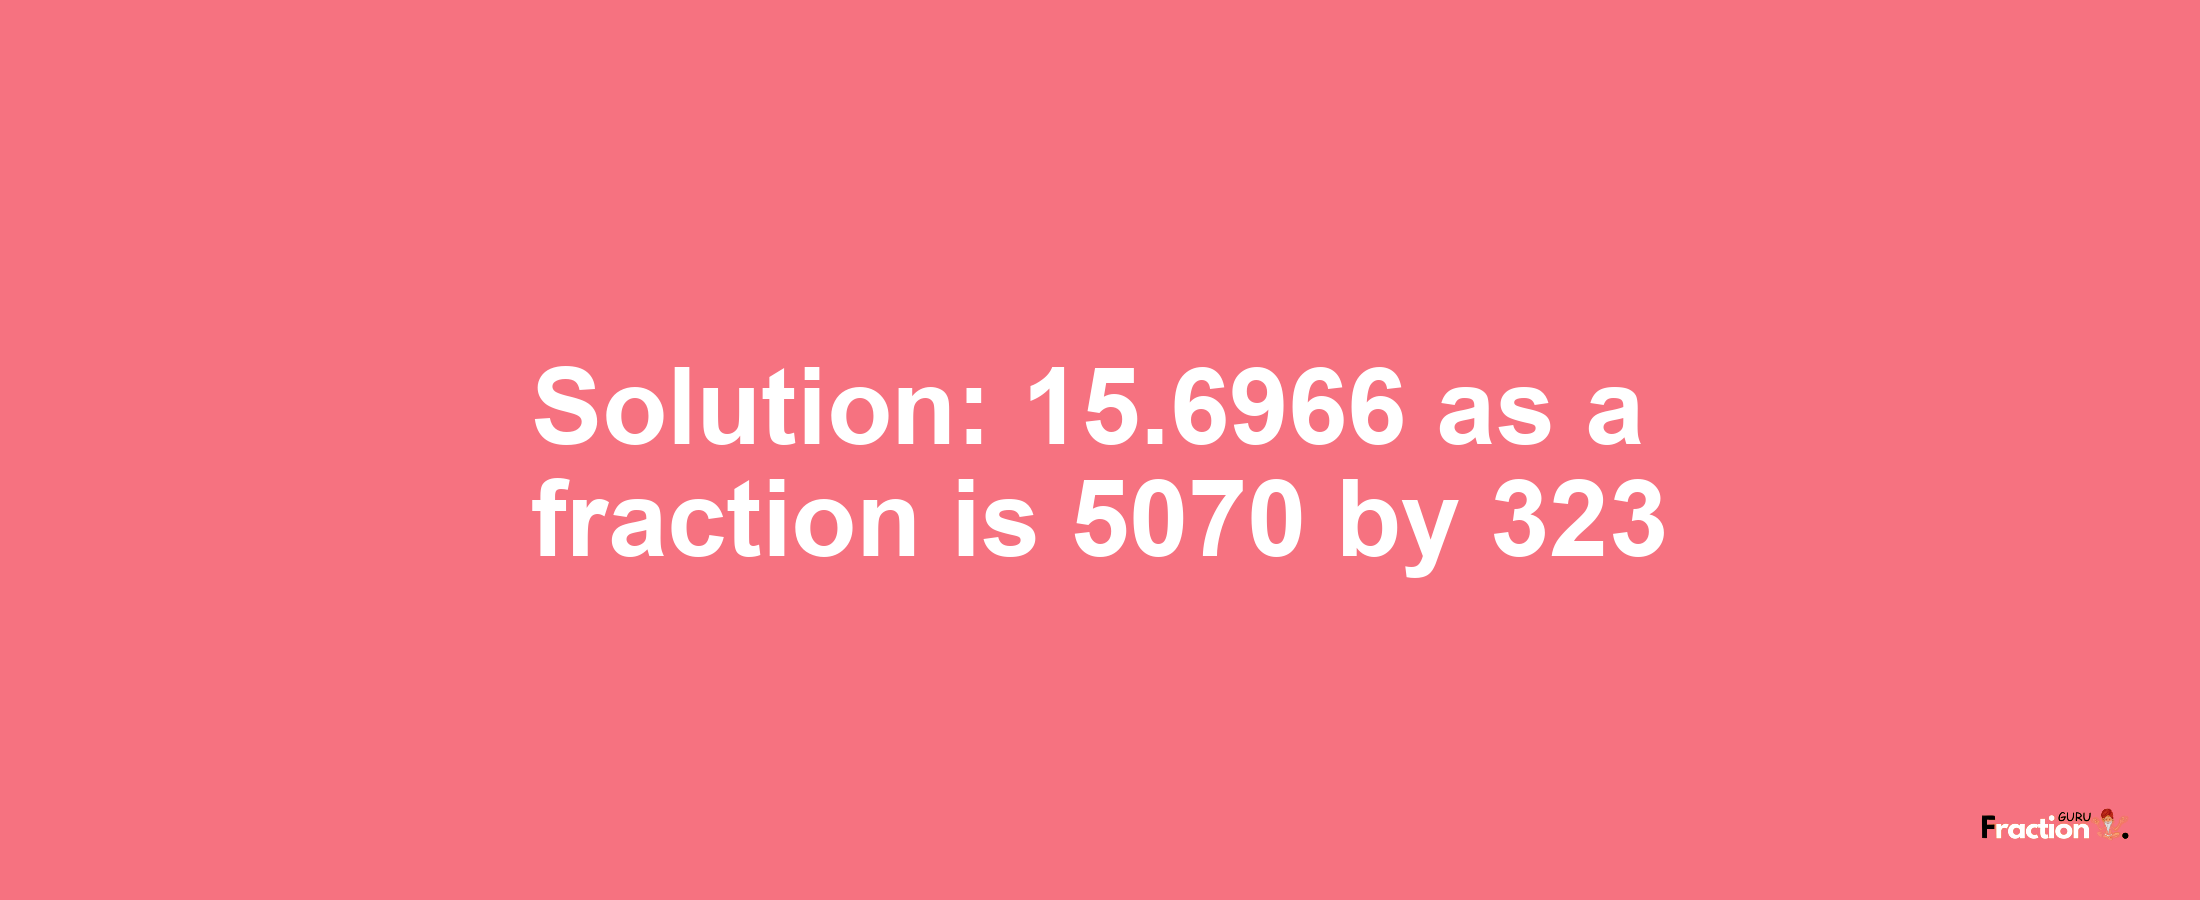 Solution:15.6966 as a fraction is 5070/323